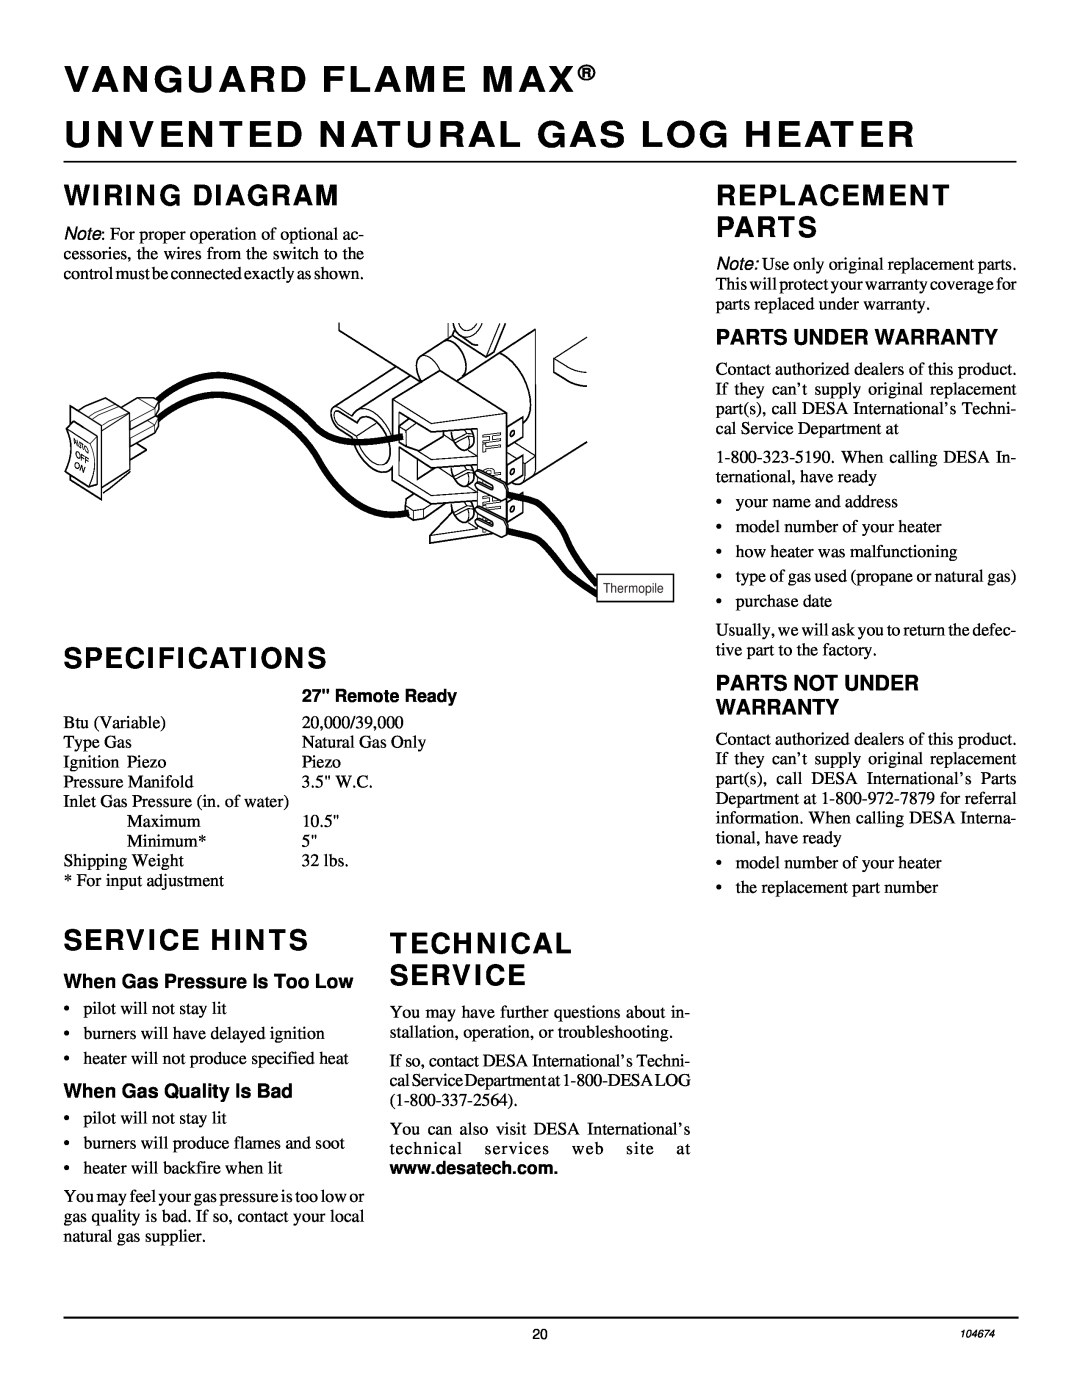 Desa VYM27NR Wiring Diagram, Replacement Parts, Specifications, Service Hints, Technical Service, Parts Under Warranty 